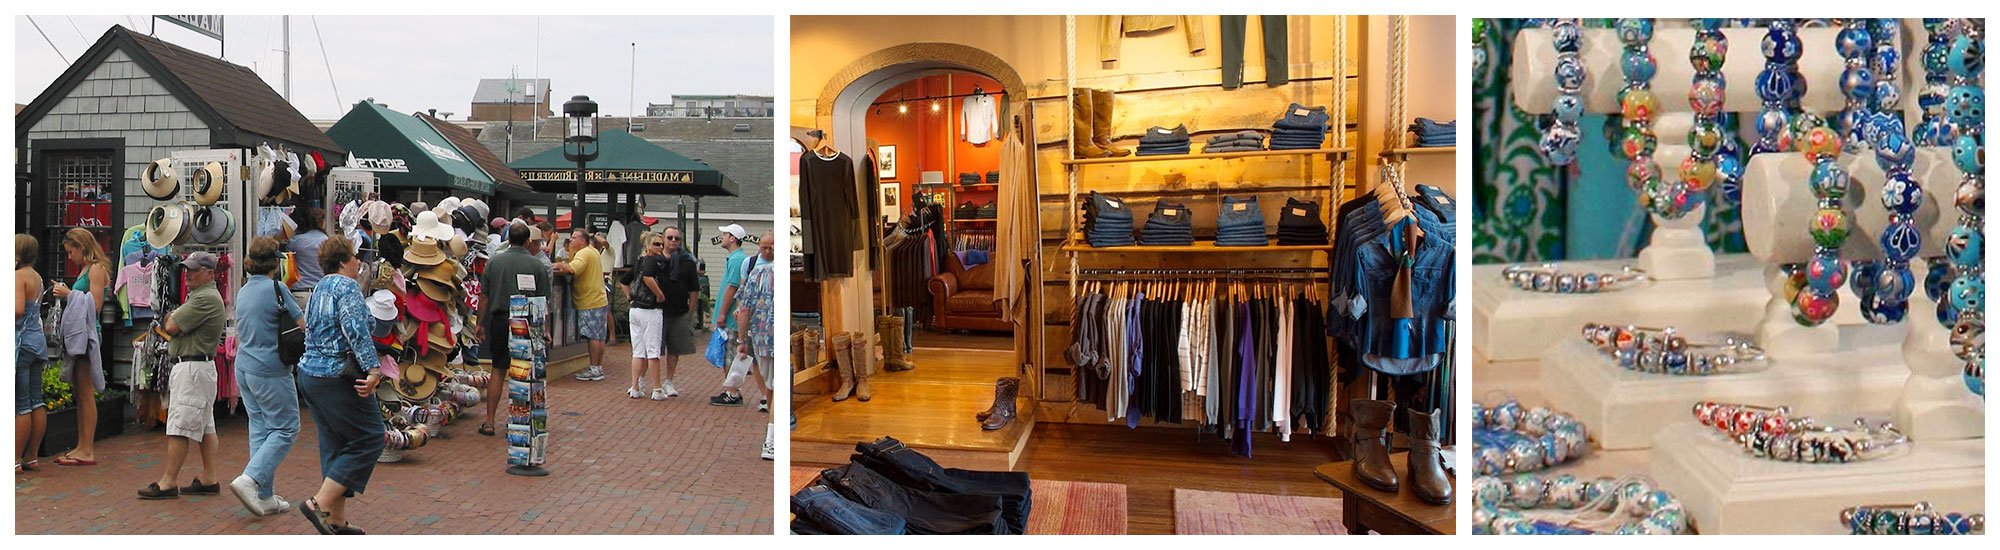 newport ri clothing stores and shopping